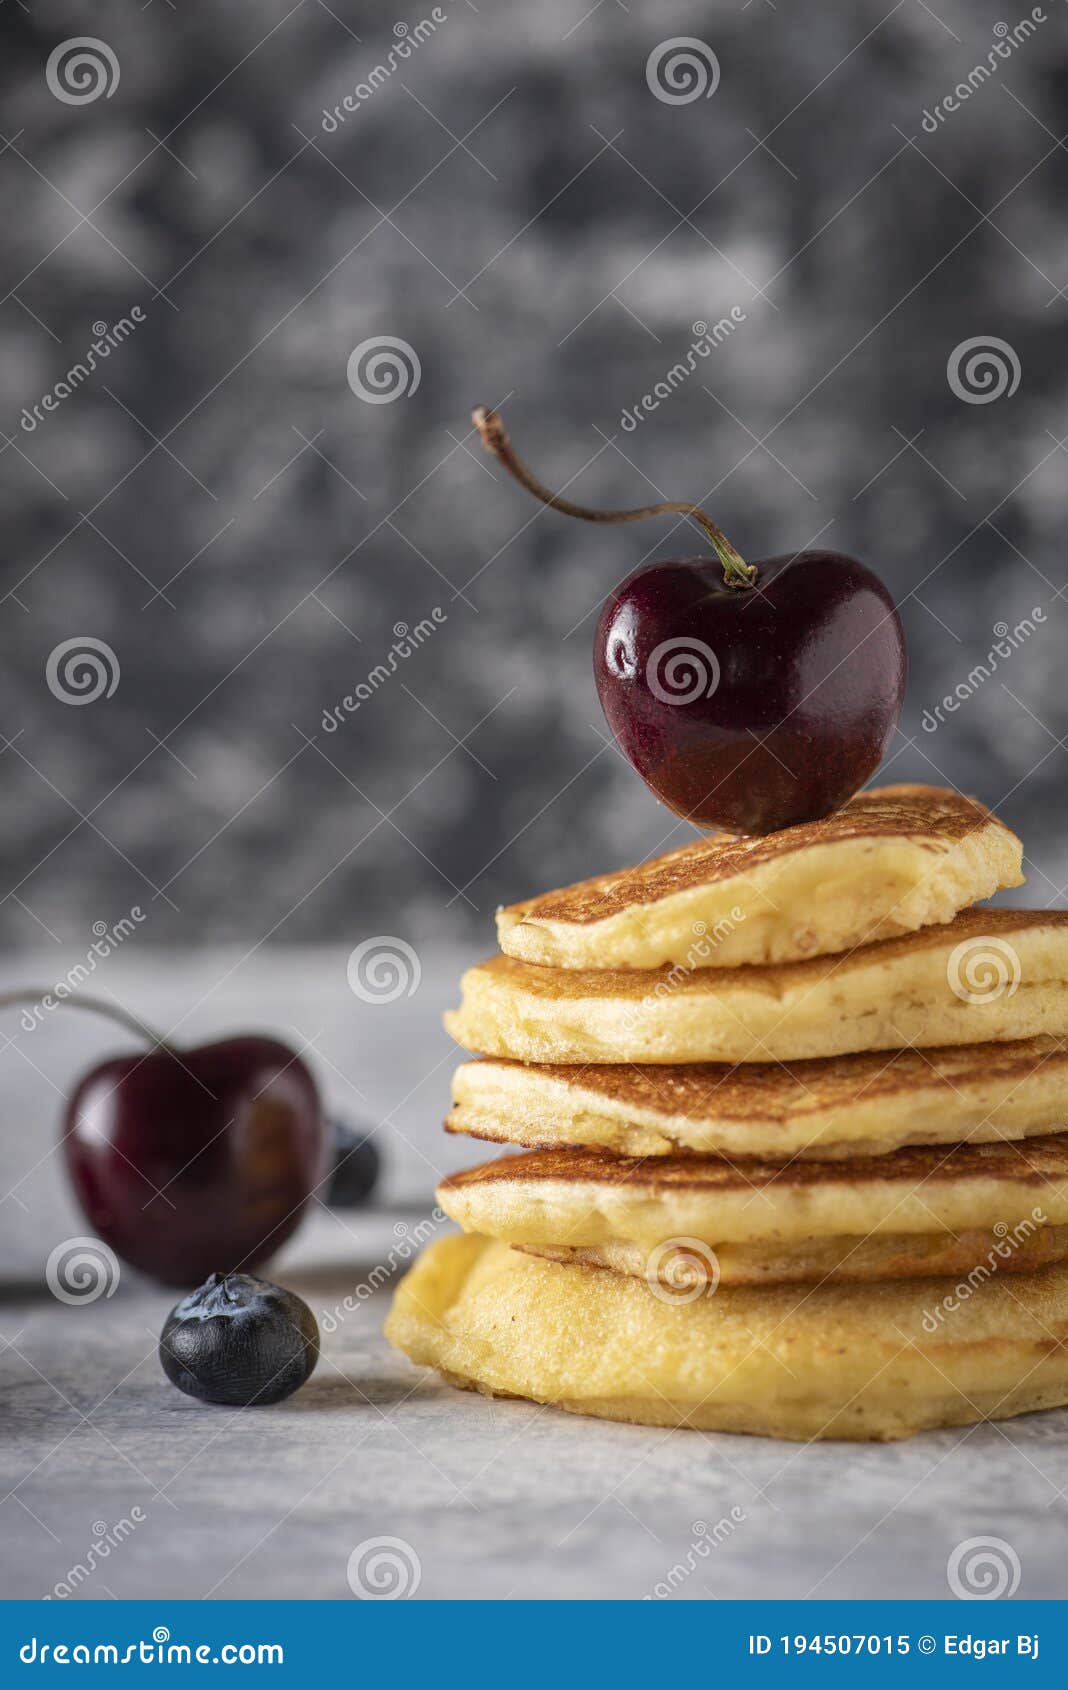 hot cakes with strawberries and cherries seen from close up